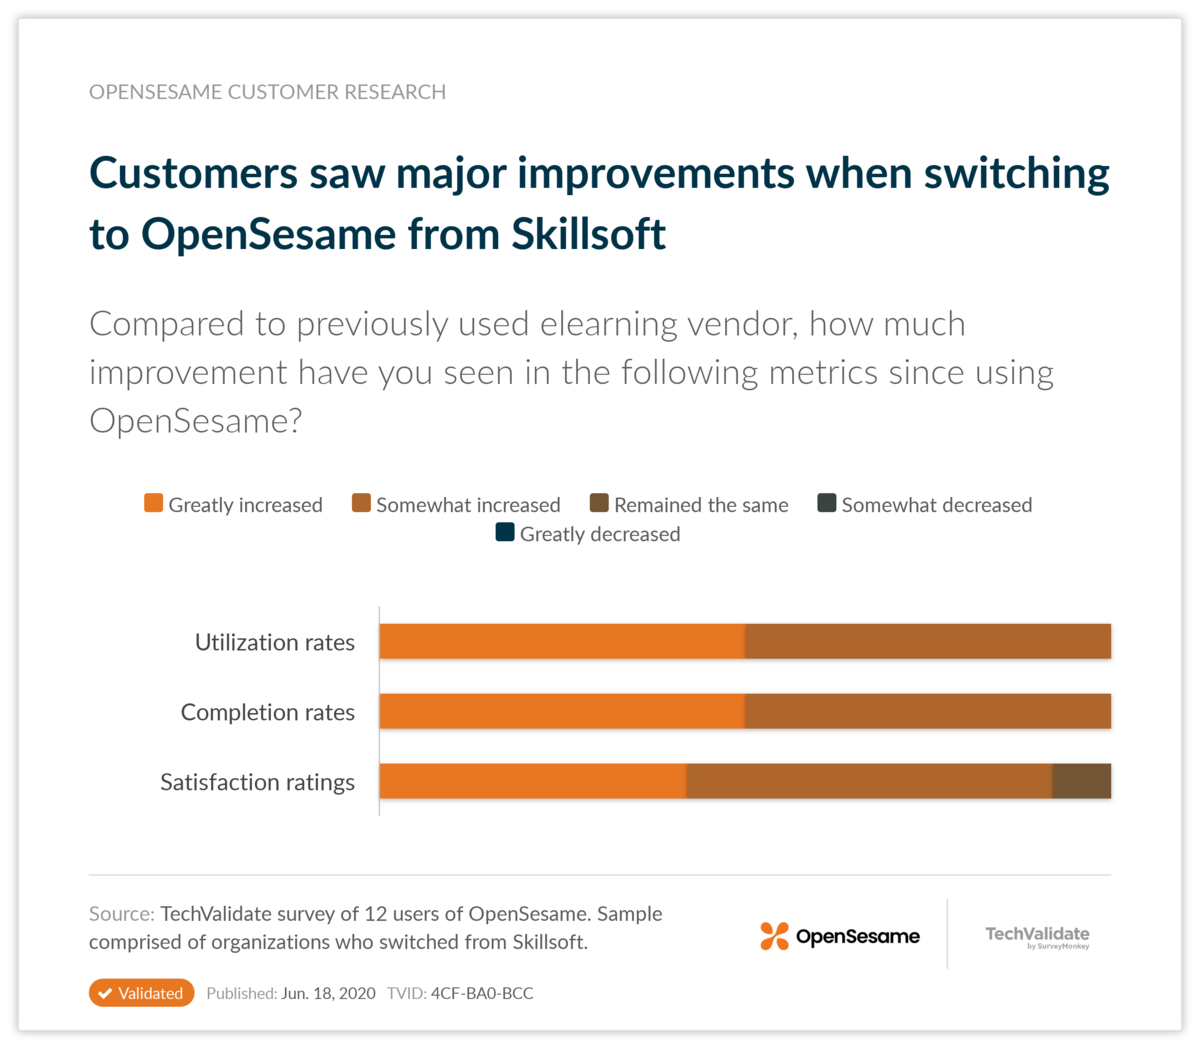 Customers saw major improvements when switching to OpenSesame from Skillsoft